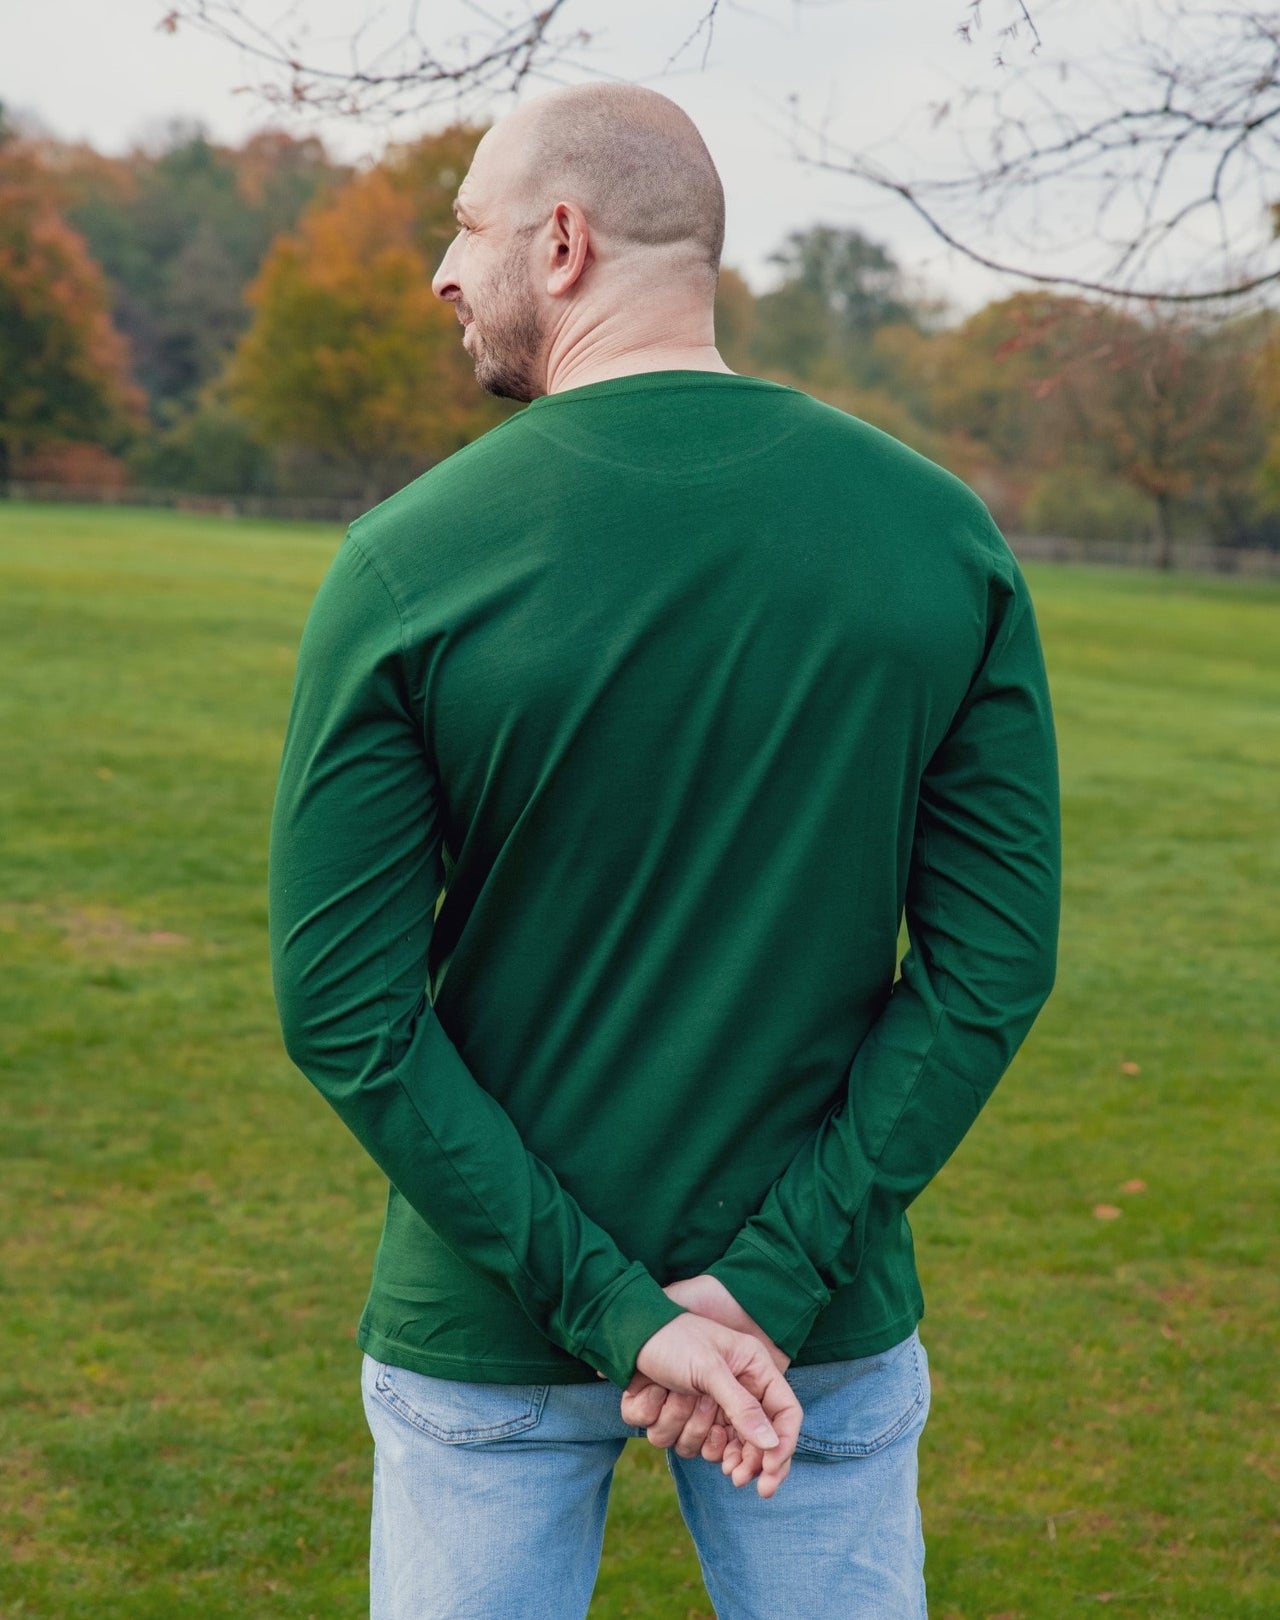 A shot from behind of a tall athletic guy wearing a long sleeve dark green tall t-shirt, hands crossed behind his back.